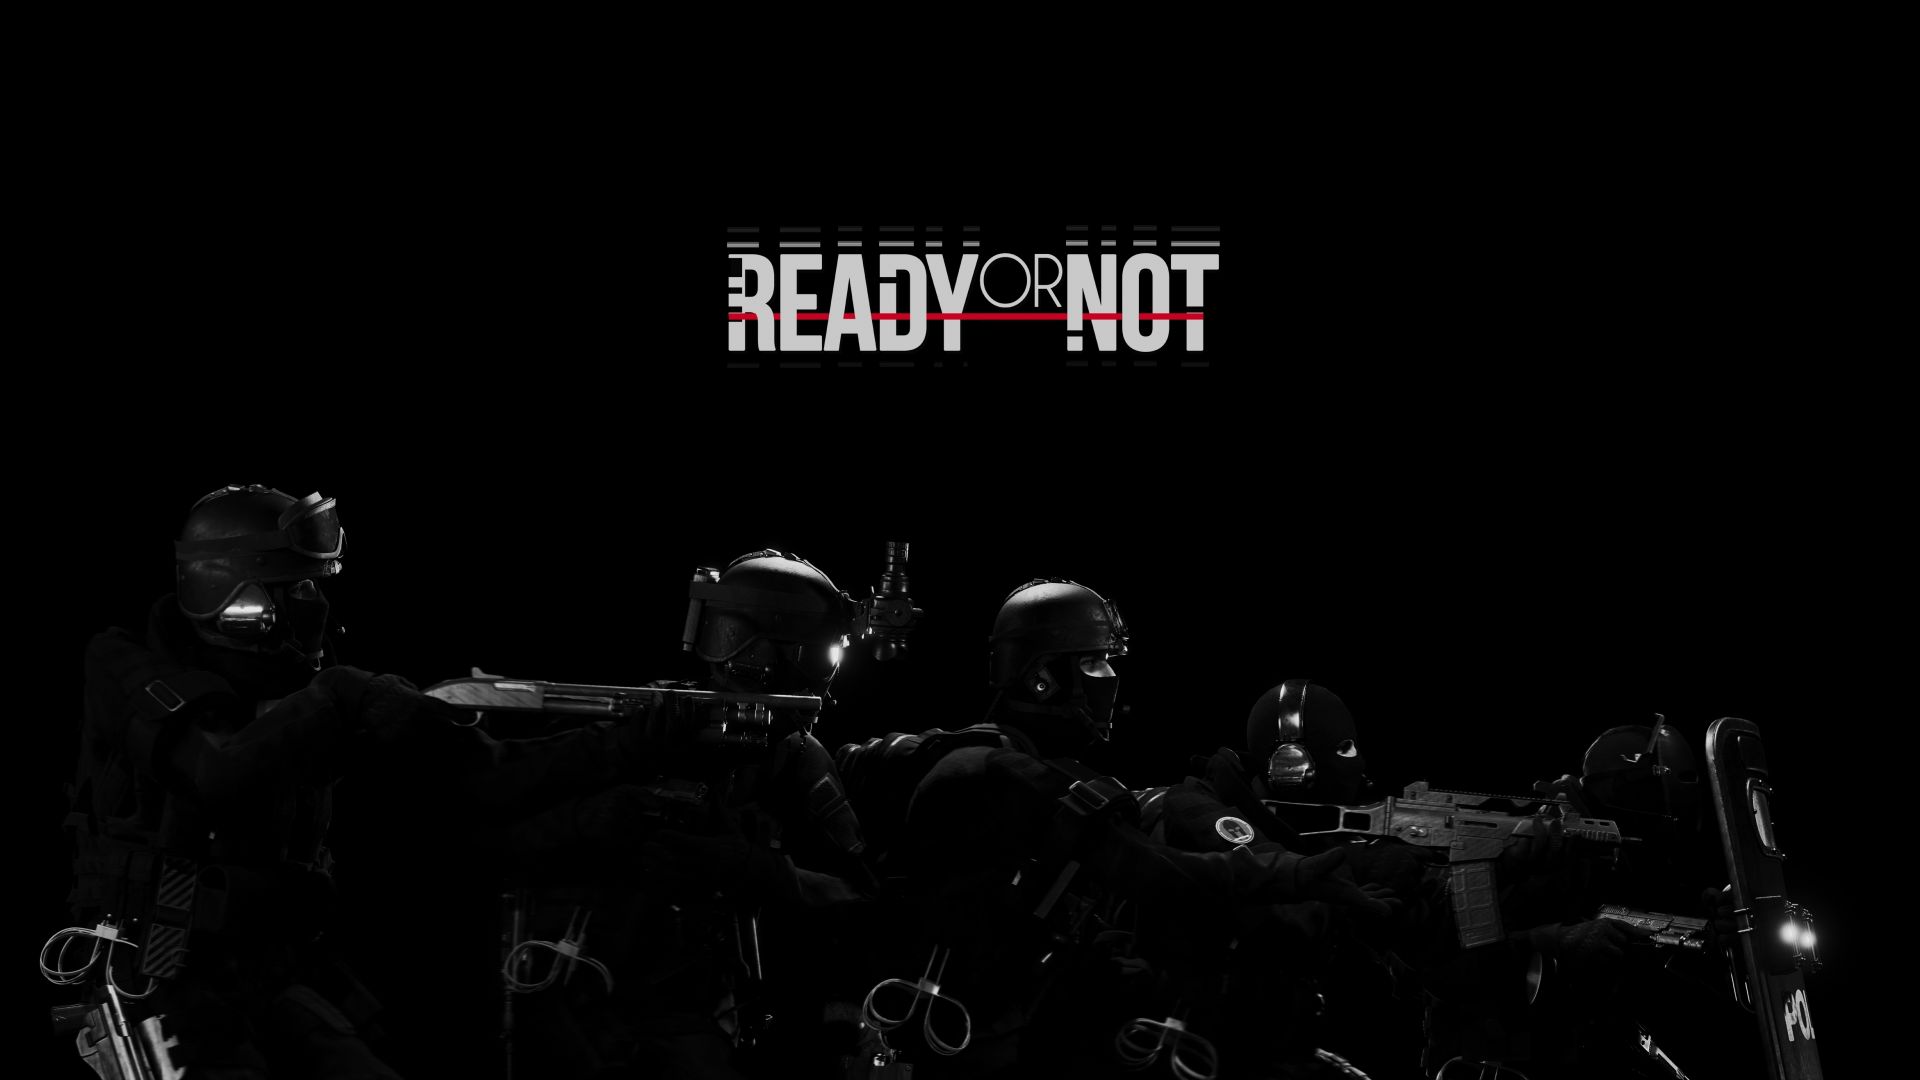 Dark, video game, ready or not, game, soldier wallpaper, HD image, picture, background, f2d204